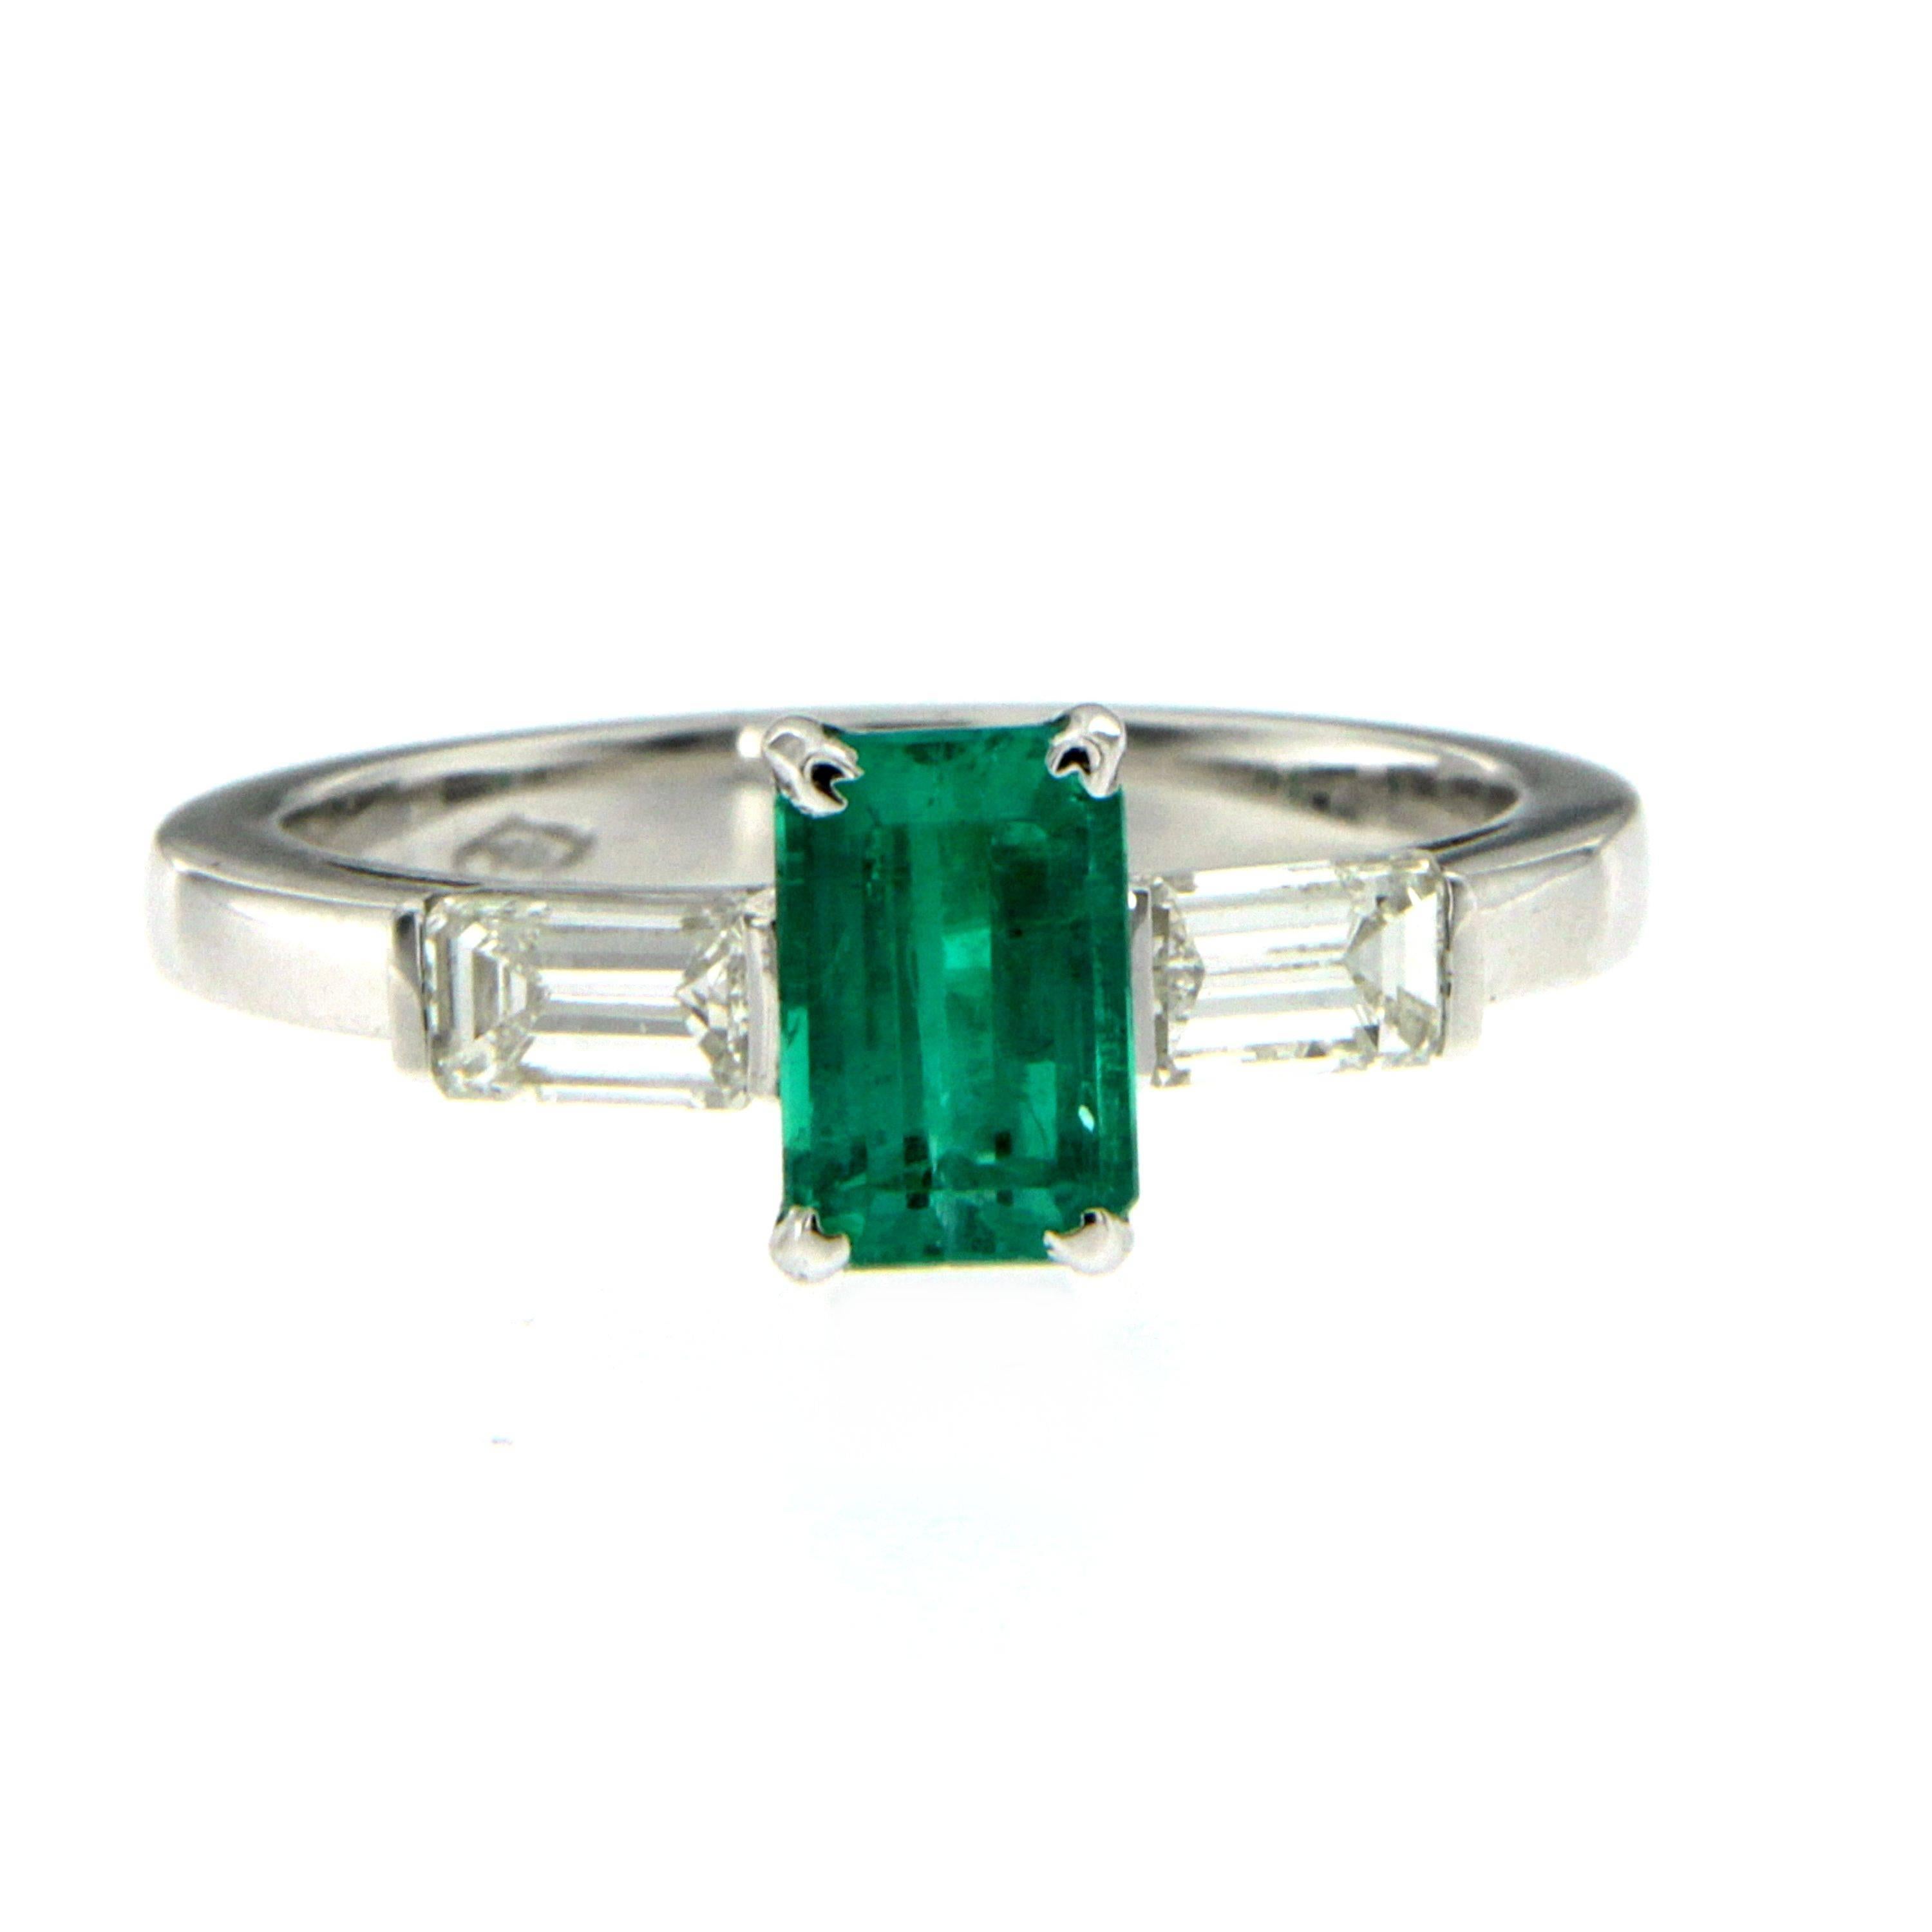 An exquisite engagement ring set in 18k white Gold featuring a 1.02 ct Emerald-cut Colombian Emerald free of any Enhancement treatment. 
Flanked on each side are baguette cut diamonds totaling 0.70 carats graded G color Vvs.

Ring Size: US 7/7.5 -